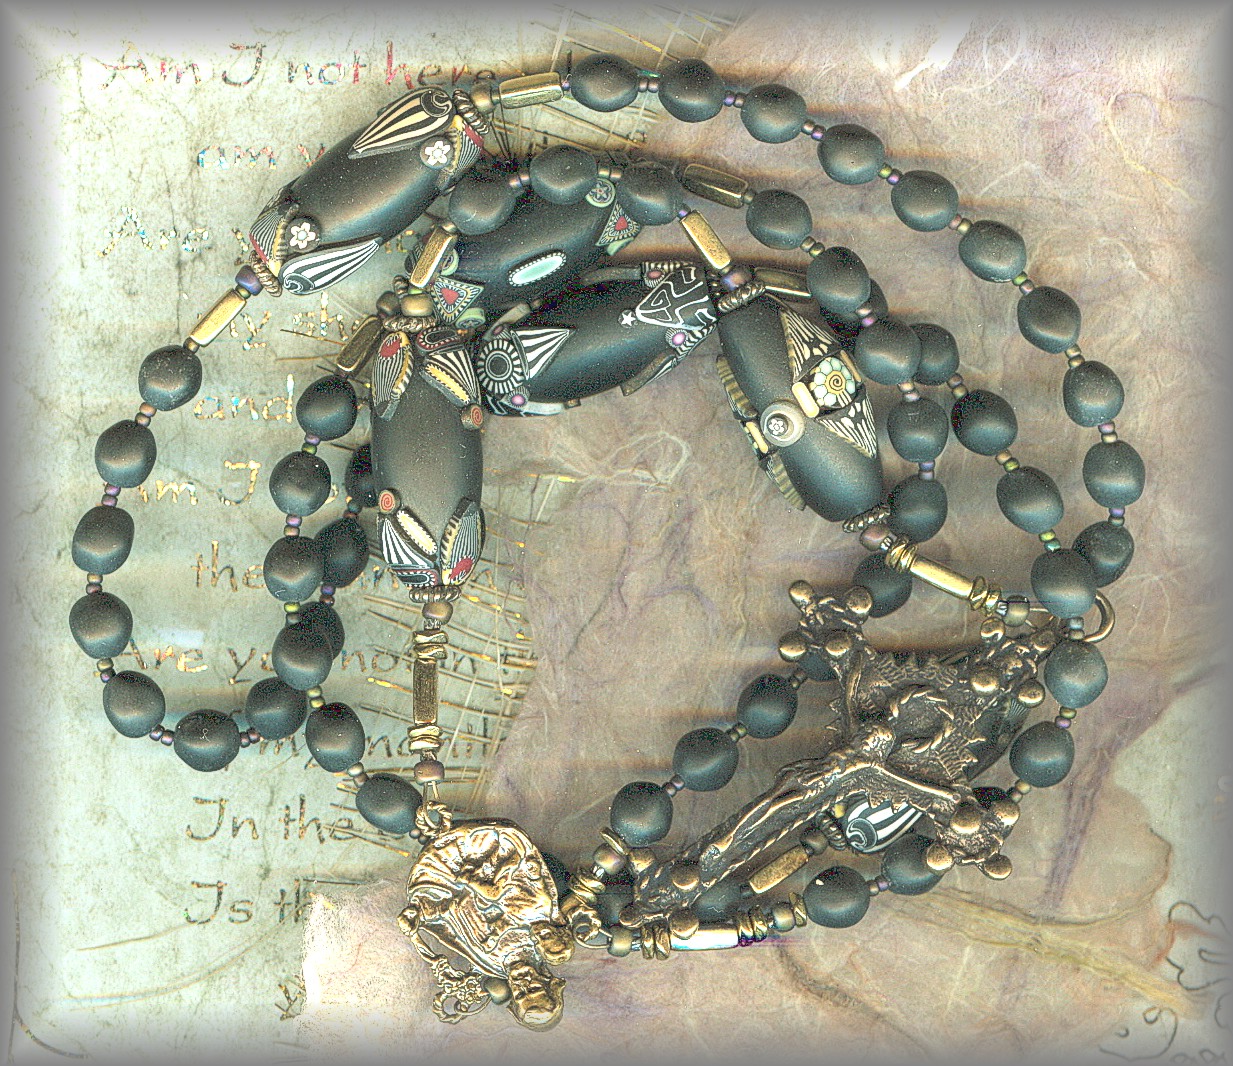 HANDMADE KLEW BEADS: Rare, rosaries, one of a kind